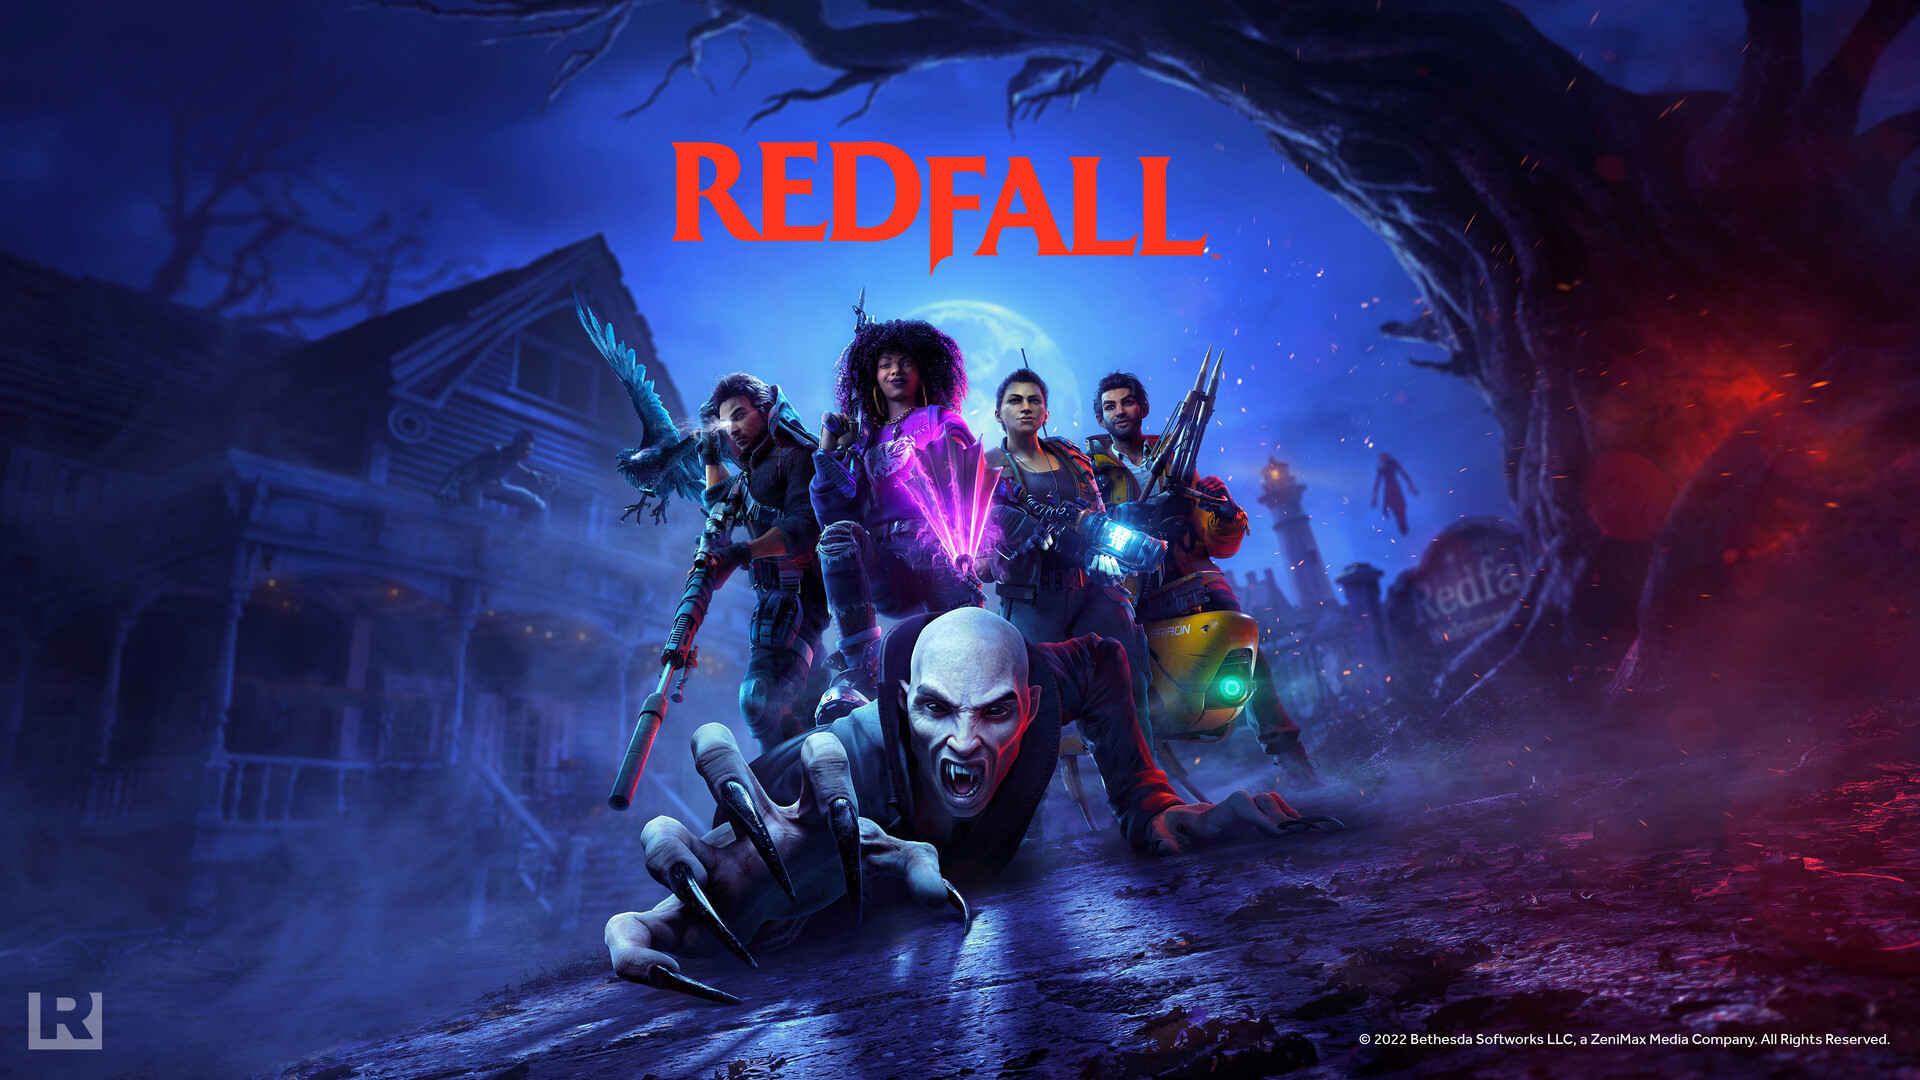 Redfall Review Roundup: A Bloody Mess That Fails To Impress